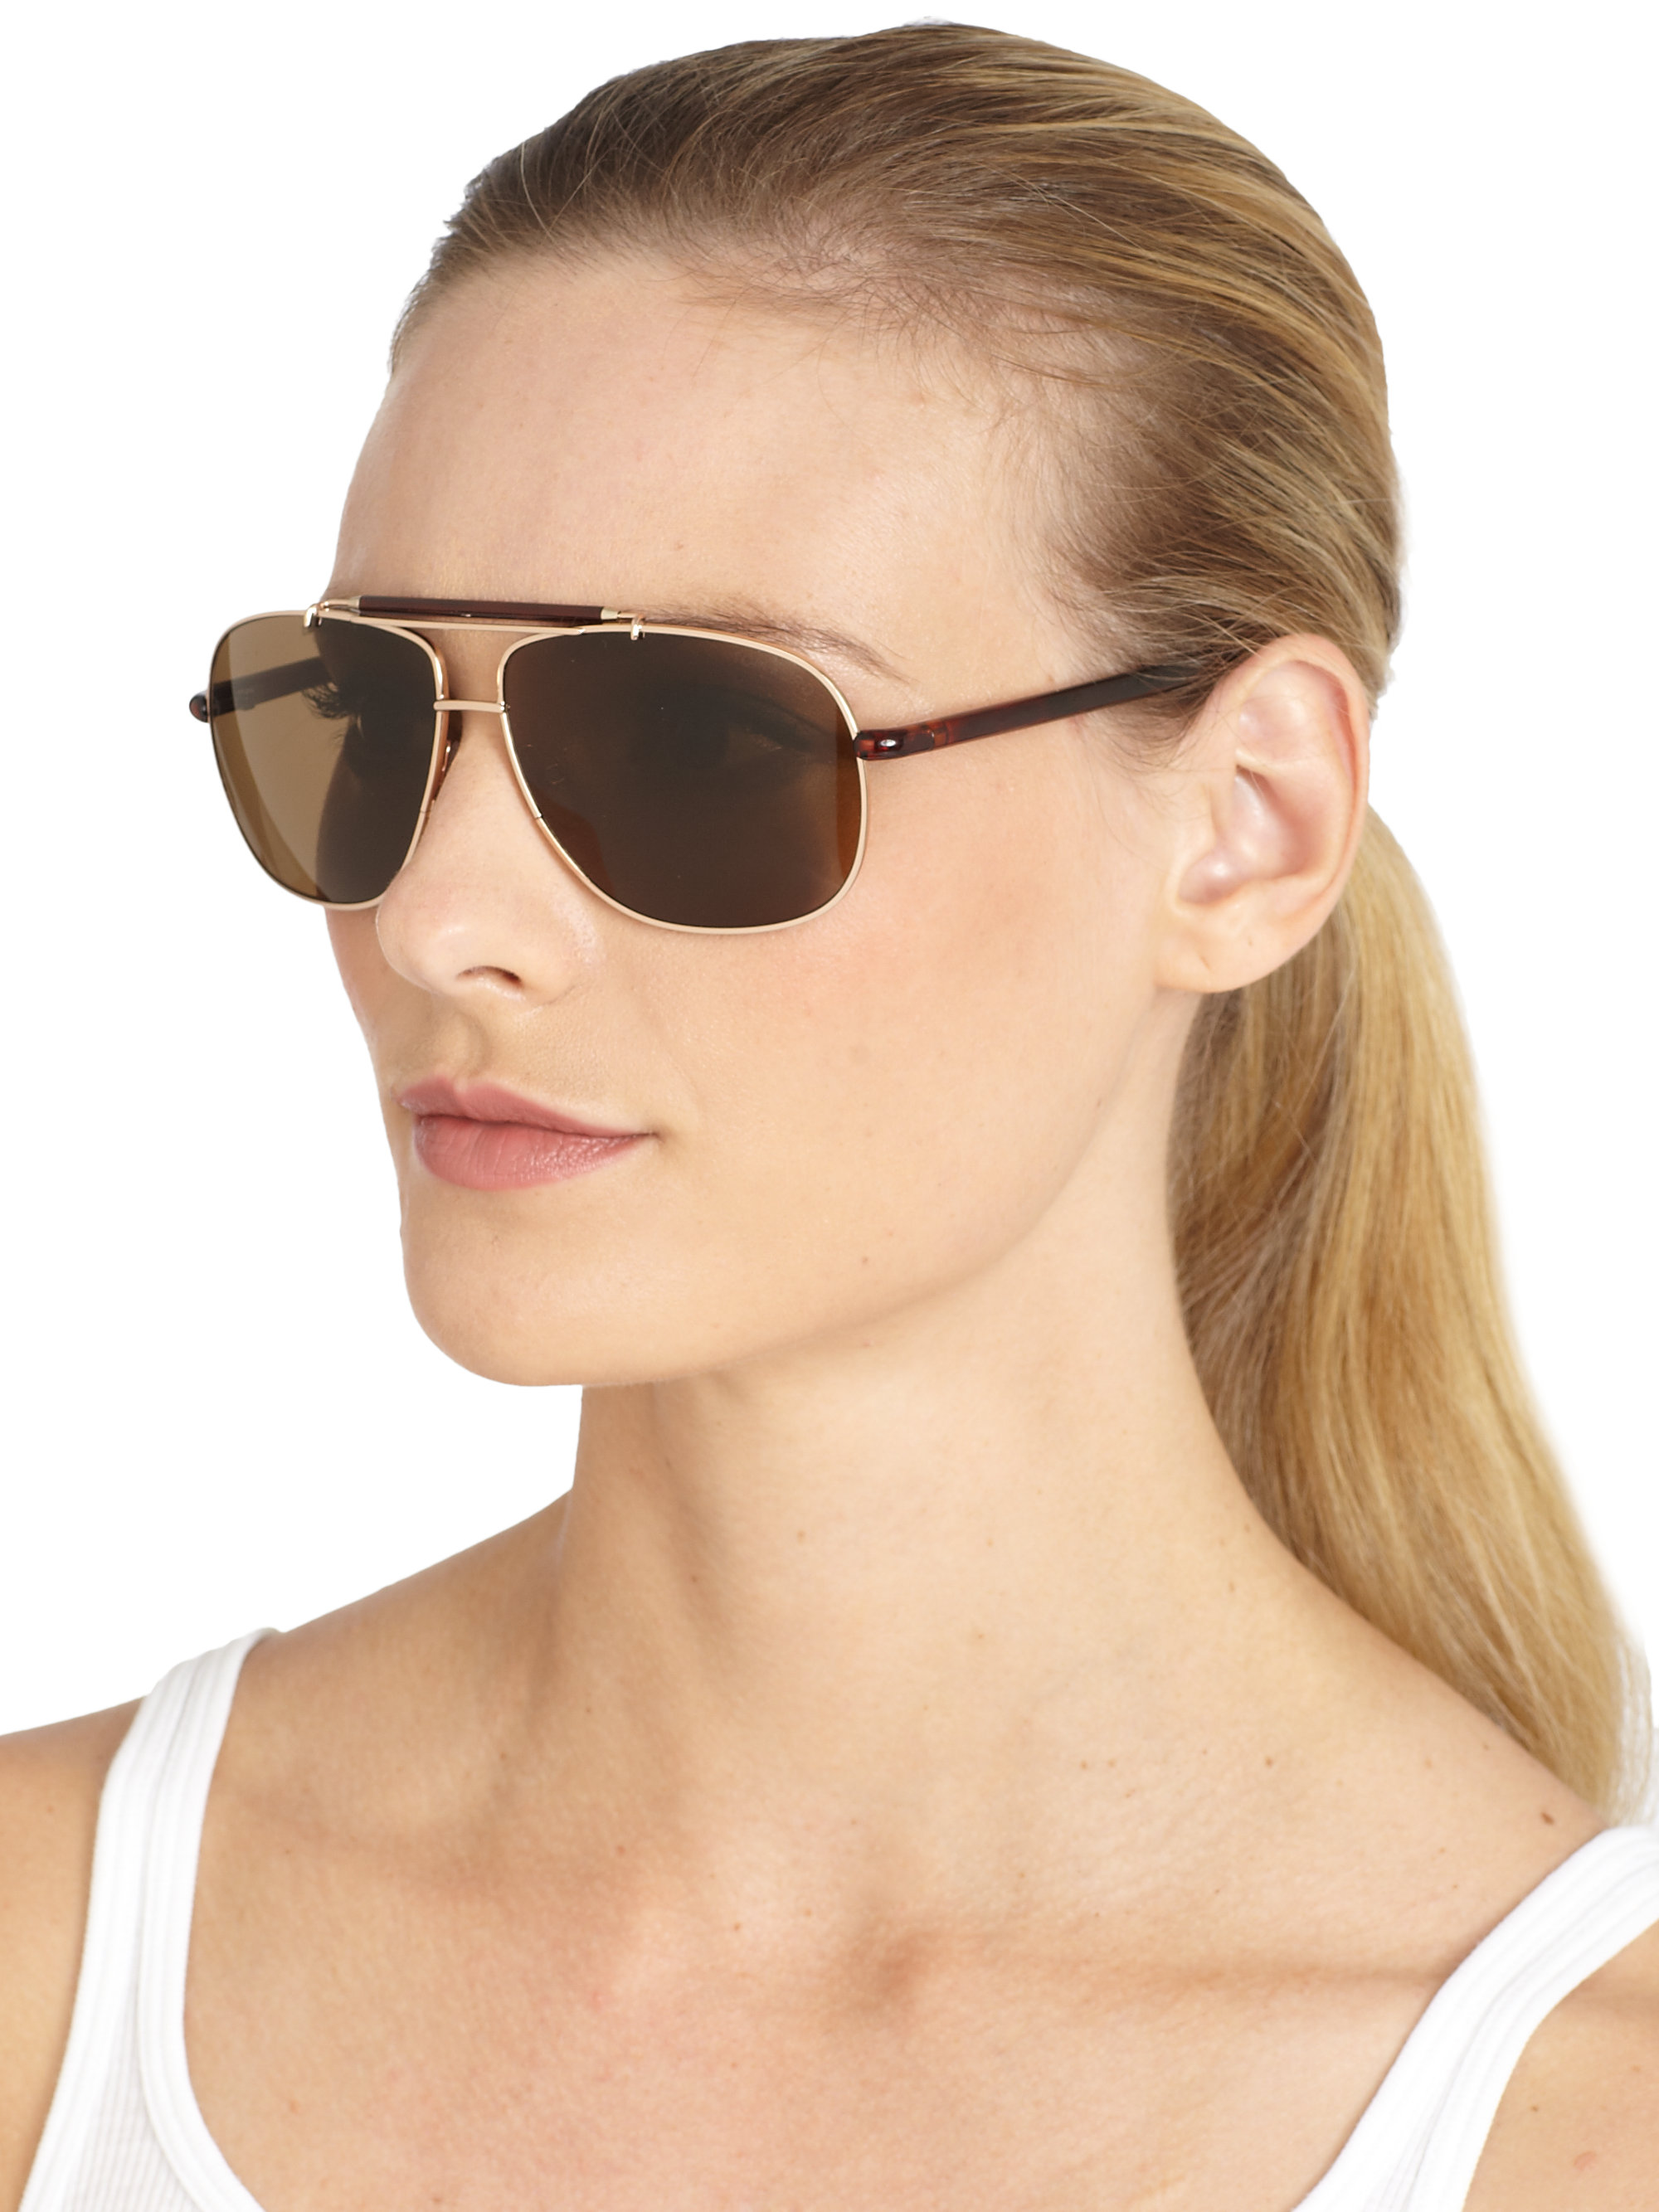 Lyst - Tom Ford Adrian Square Metal Sunglasses in Brown